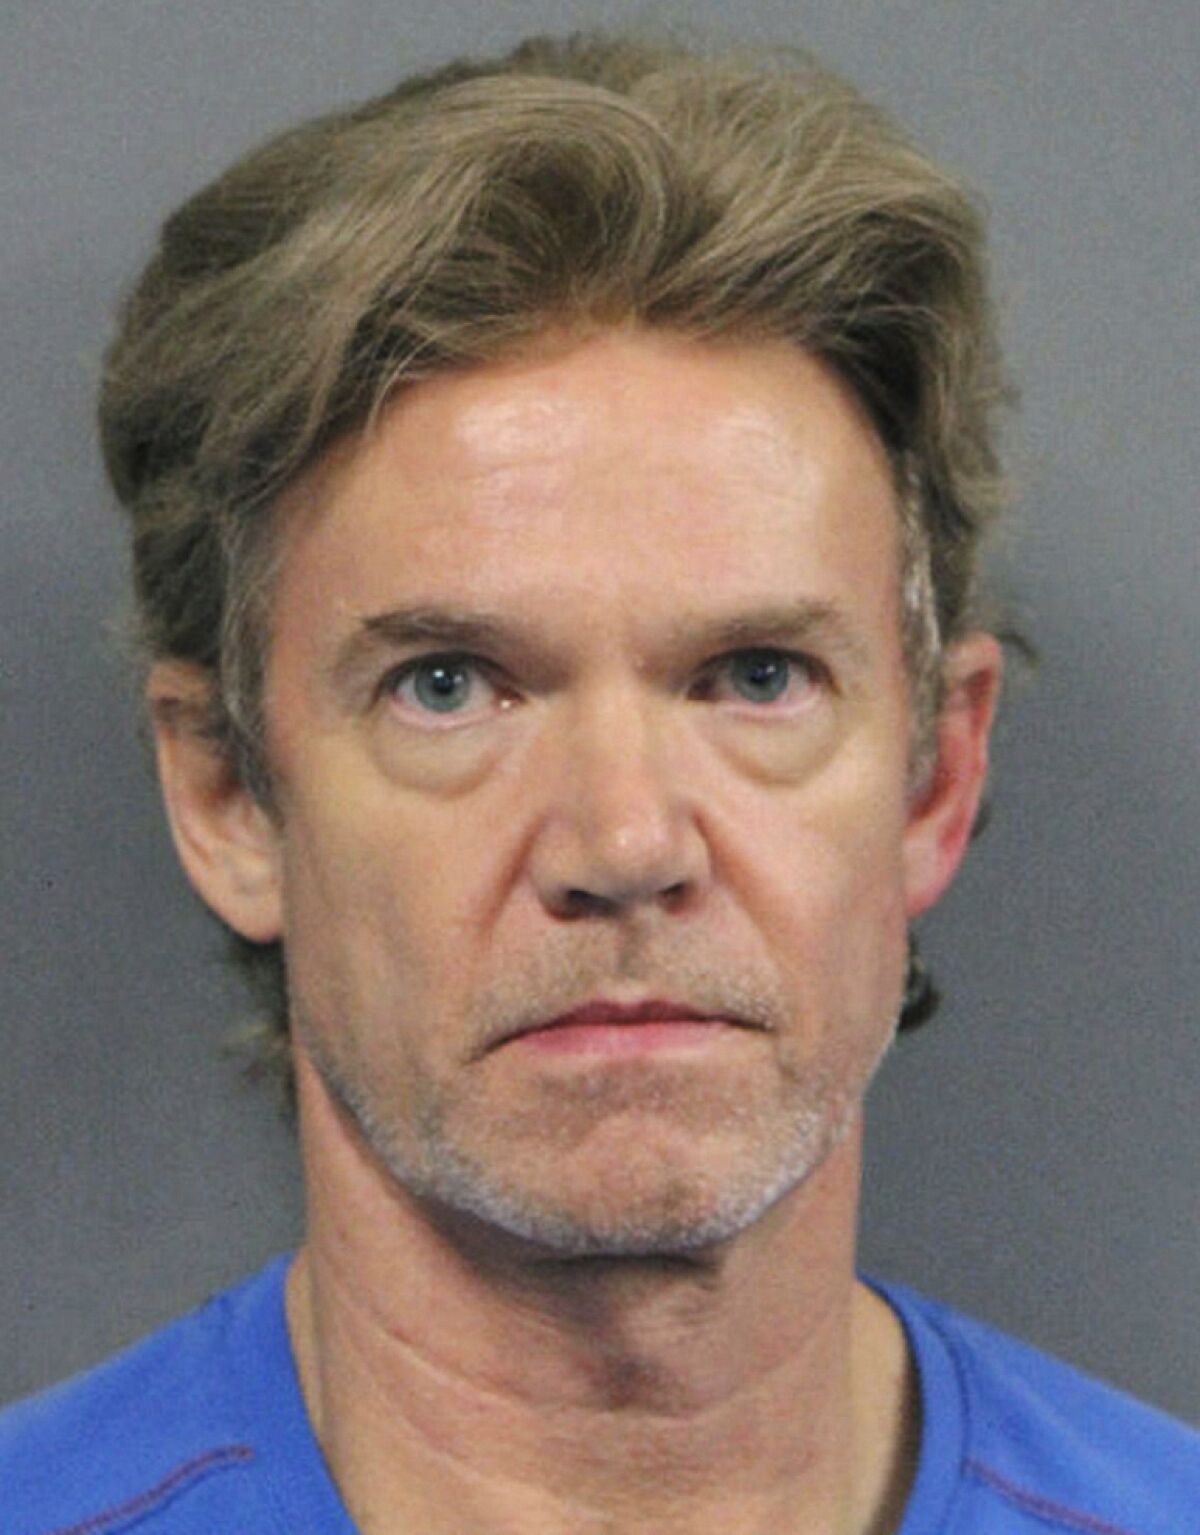 FILE - This undated file photo released by the Jefferson Parish Sheriff's Office shows Ronald Gasser. Louisiana’s Supreme Court has agreed to hear arguments on whether Gasser, the man who killed former NFL player Joe McKnight in a road rage incident, can be tried again for murder after his conviction on a lesser charge was overturned. (Jefferson Parish Sheriff's Office via AP, File)